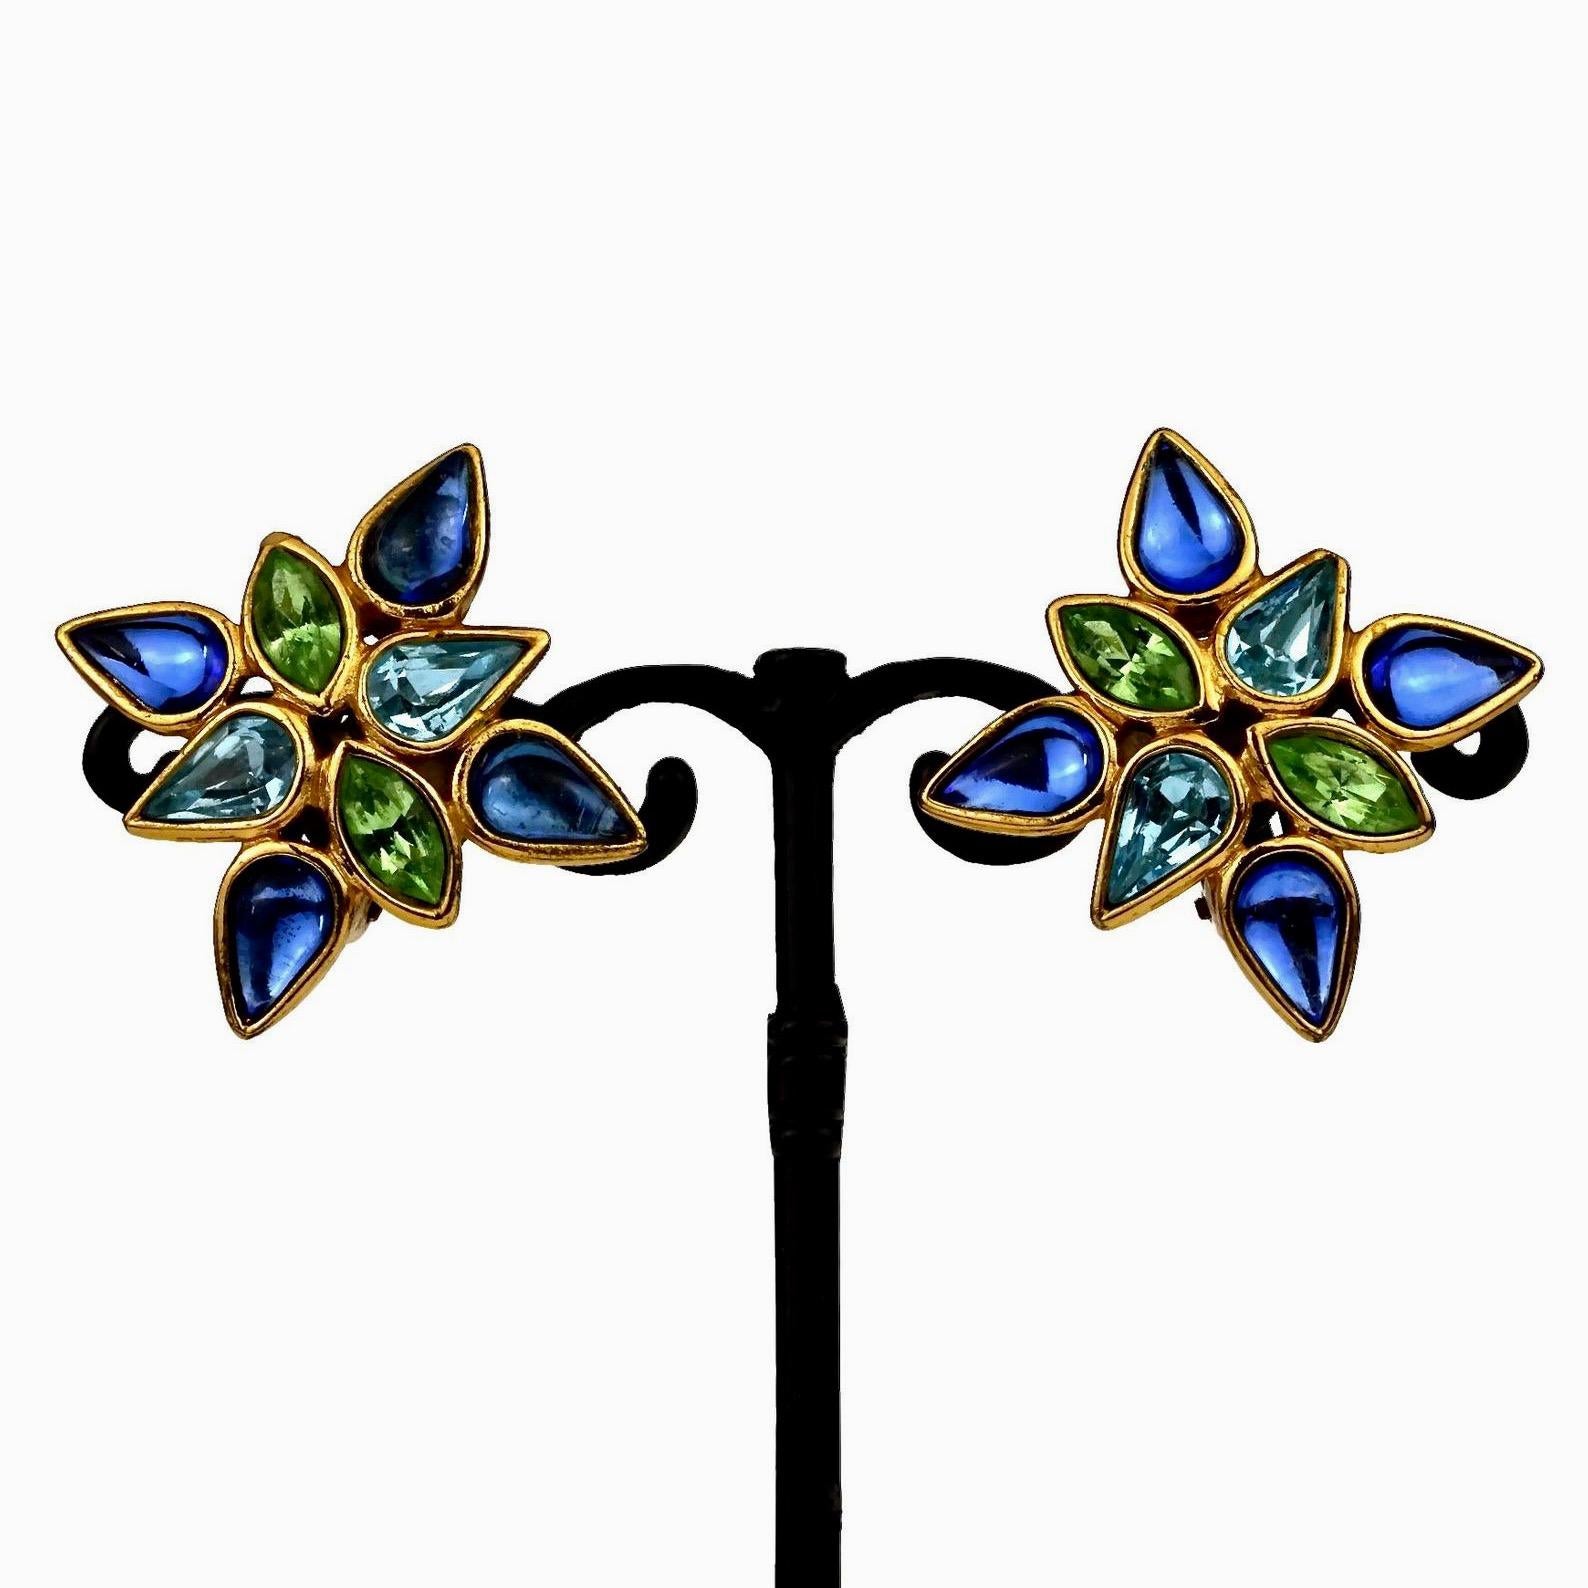 Vintage YVES SAINT LAURENT Ysl Blue Green Rhinestones Earrings In Excellent Condition For Sale In Kingersheim, Alsace